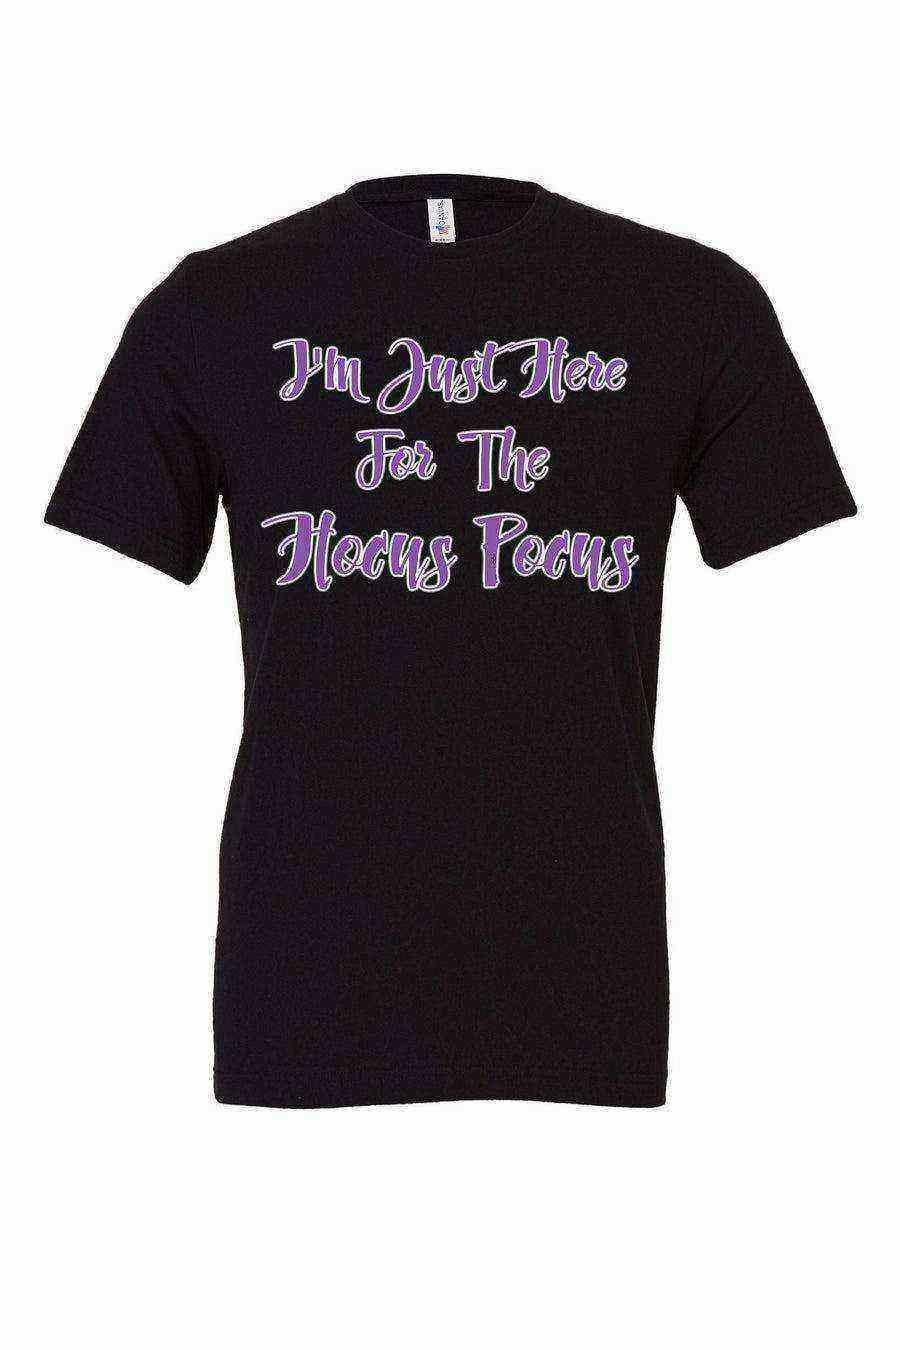 Womens | Im Just Here for the Hocus Pocus Shirt - Dylan's Tees